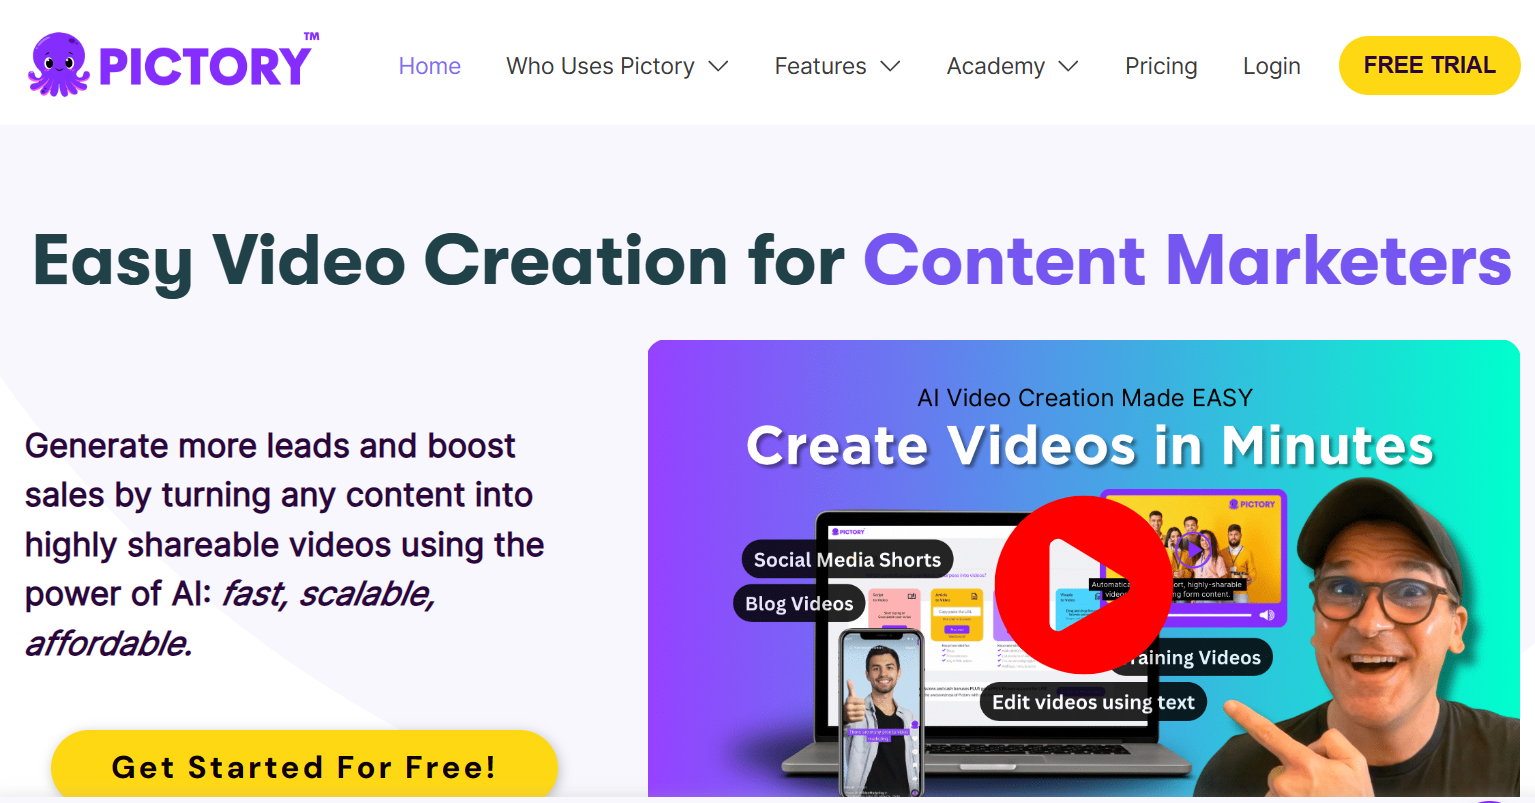 pictory.ai – Easy Video Creation